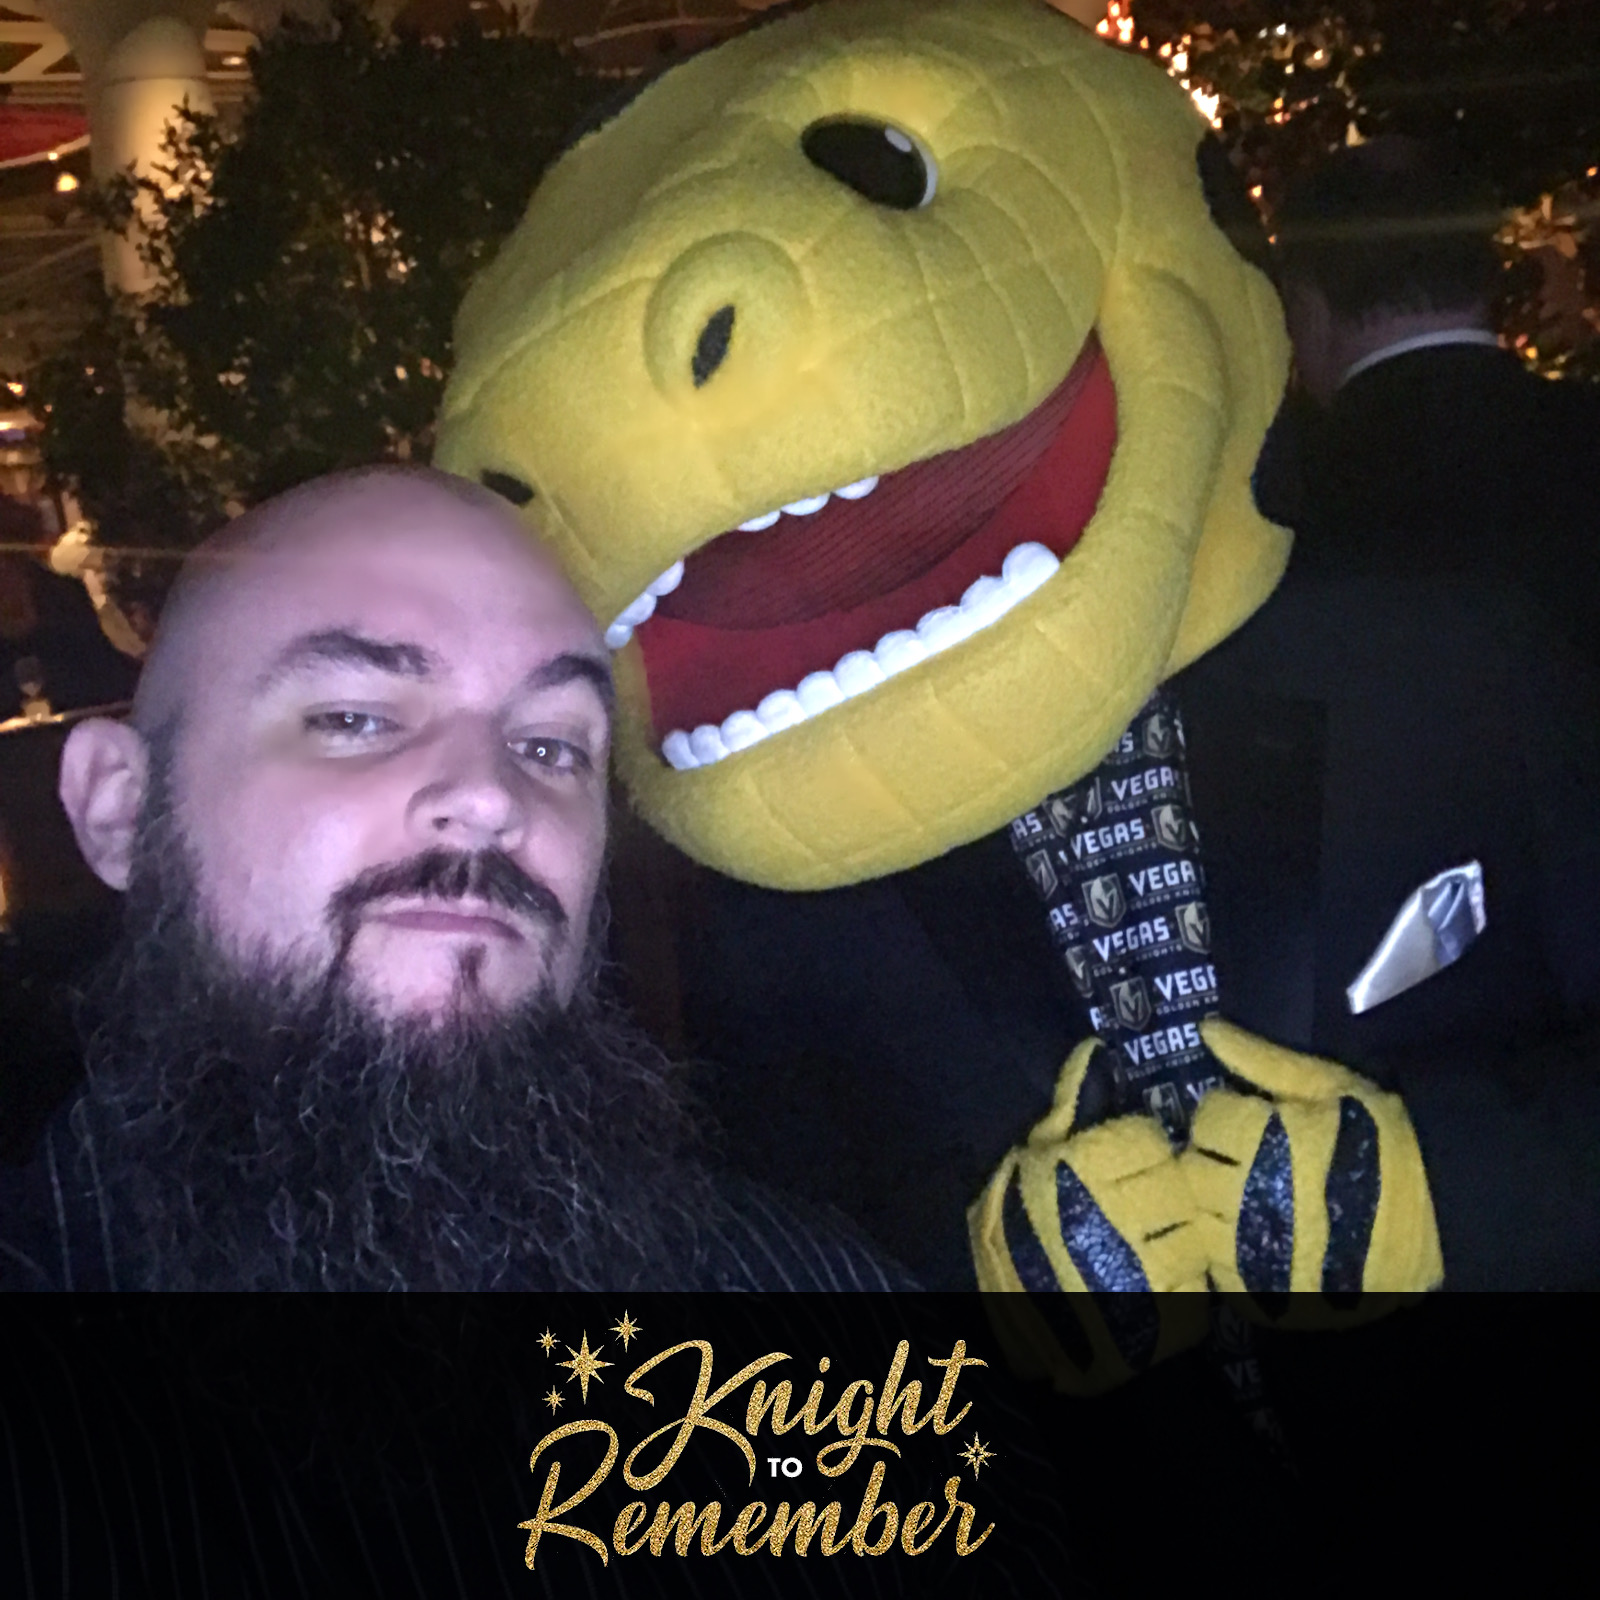 Vegas knights mascot dinosaur with bearded man Photo Booth Rentals in Las Vegas Smash Booth